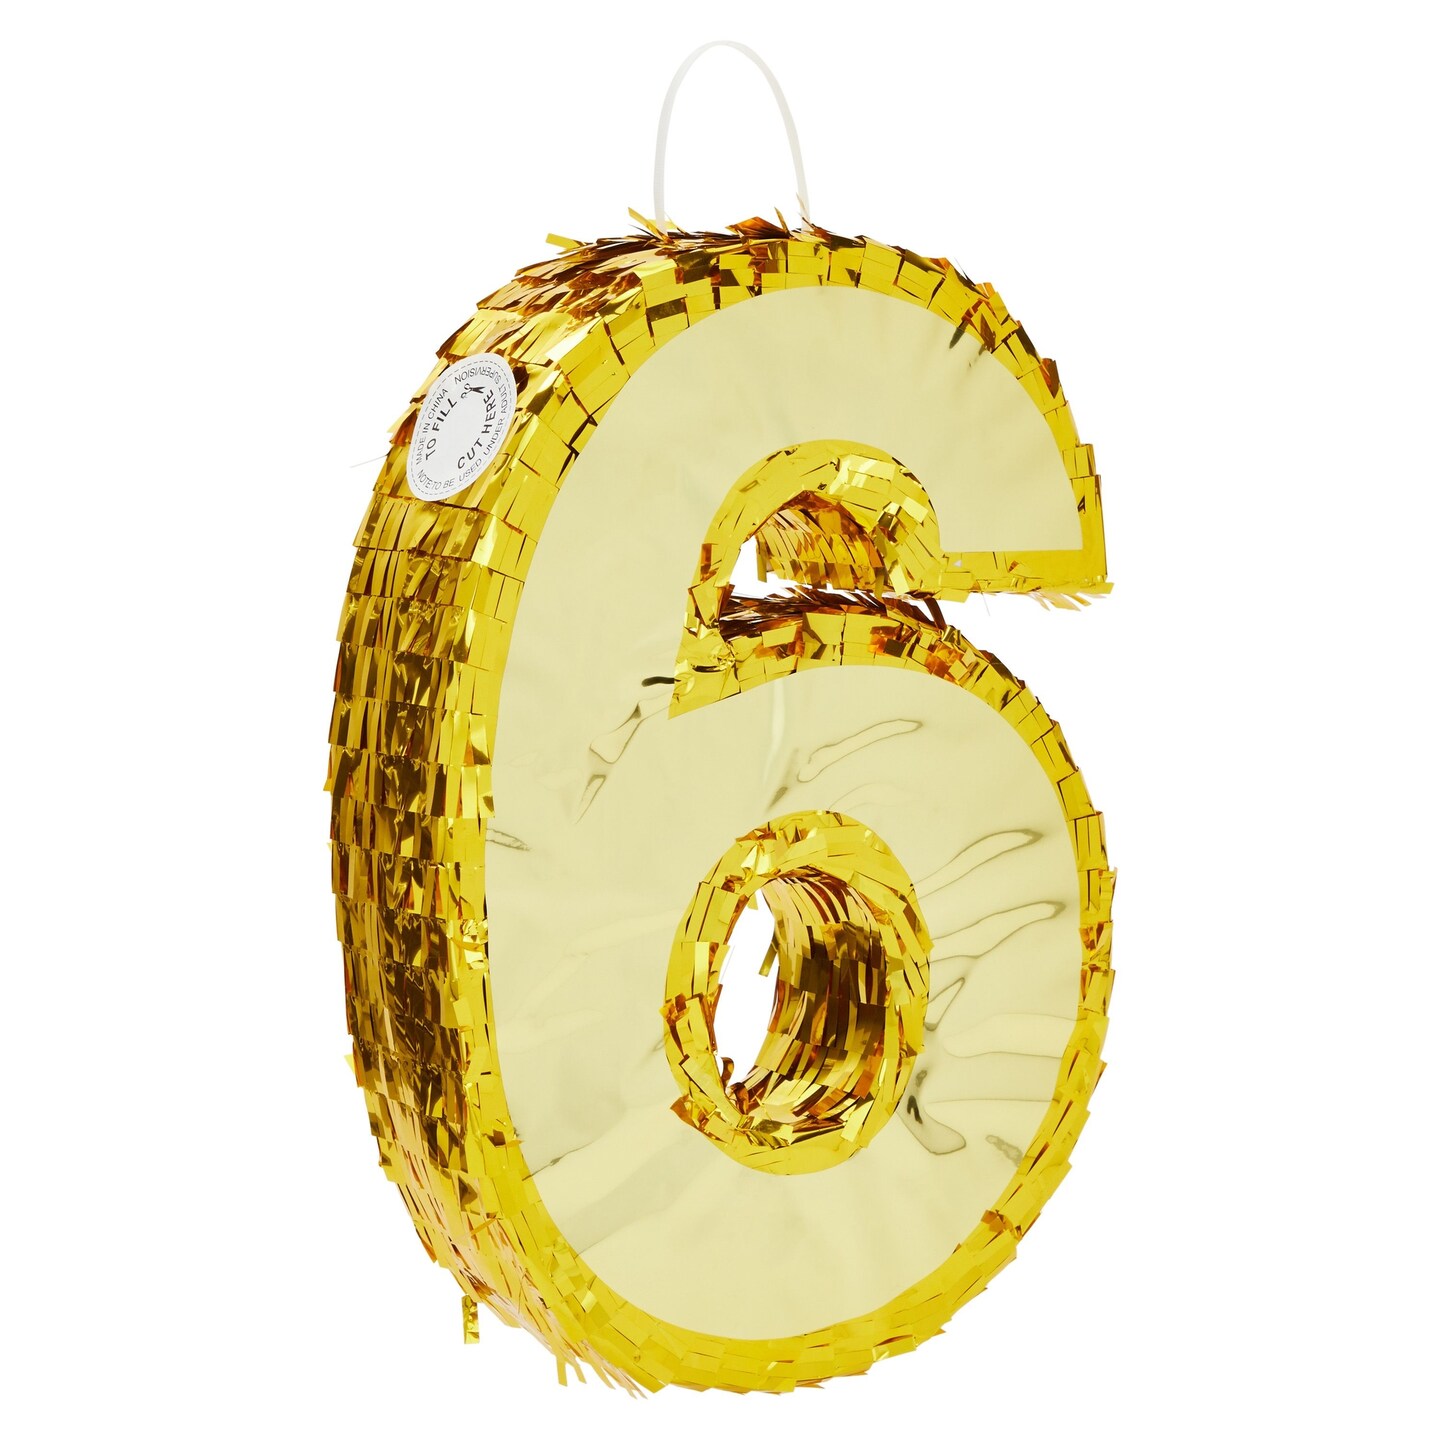 Gold Foil Number 6 Pinata for 6th Birthday Party Decorations, Centerpieces, Anniversary Celebrations (Small, 15.5 x 10.5 x 3 In)